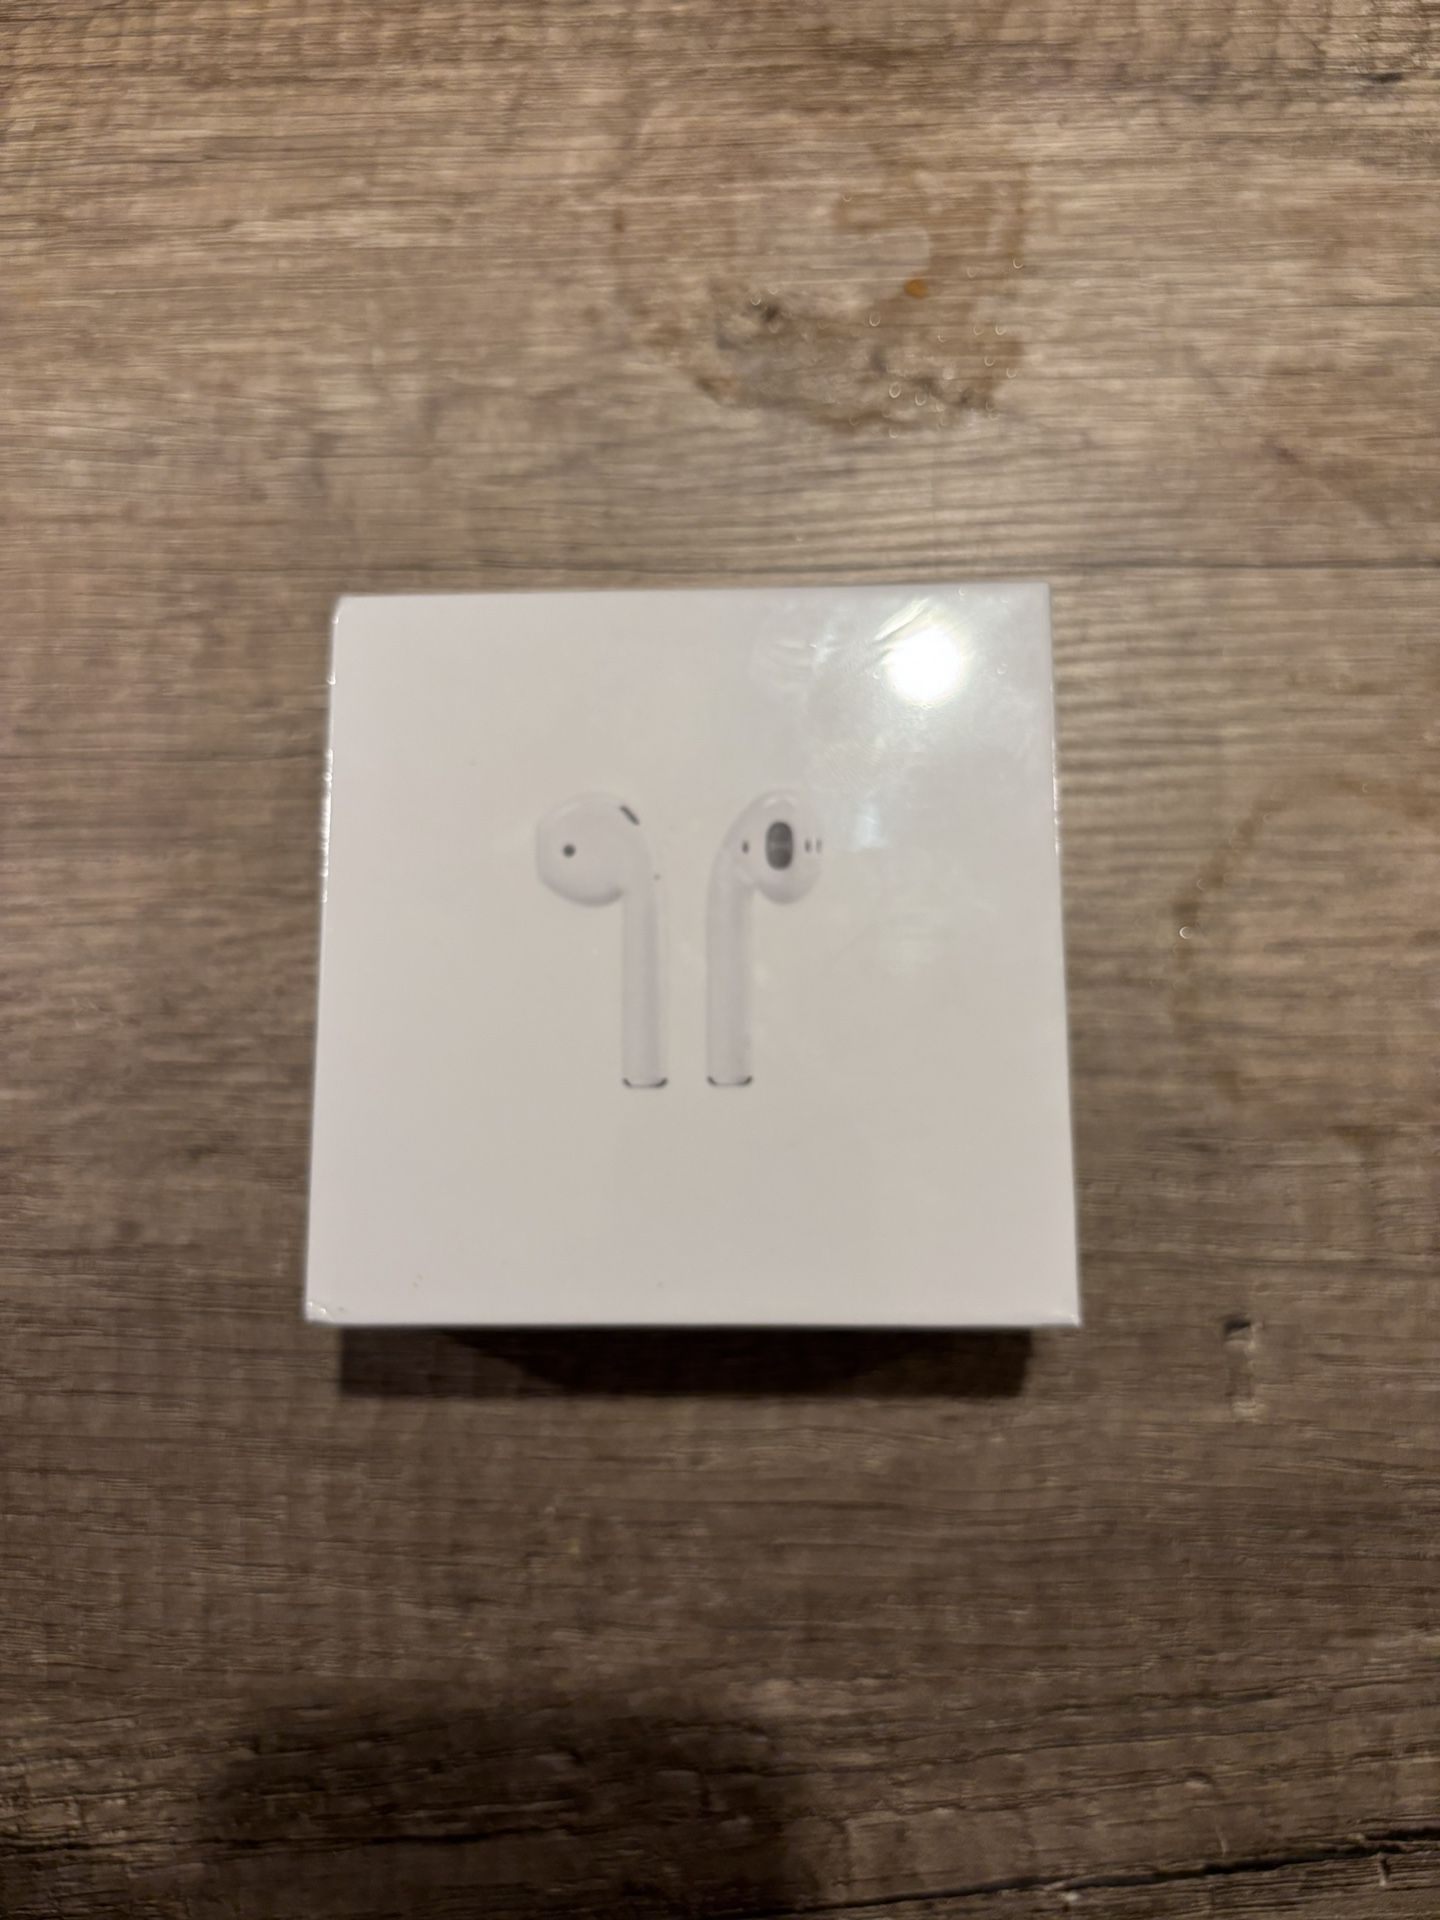 BRAND NEW AIRPODS 1st GEN CHARGING CASE